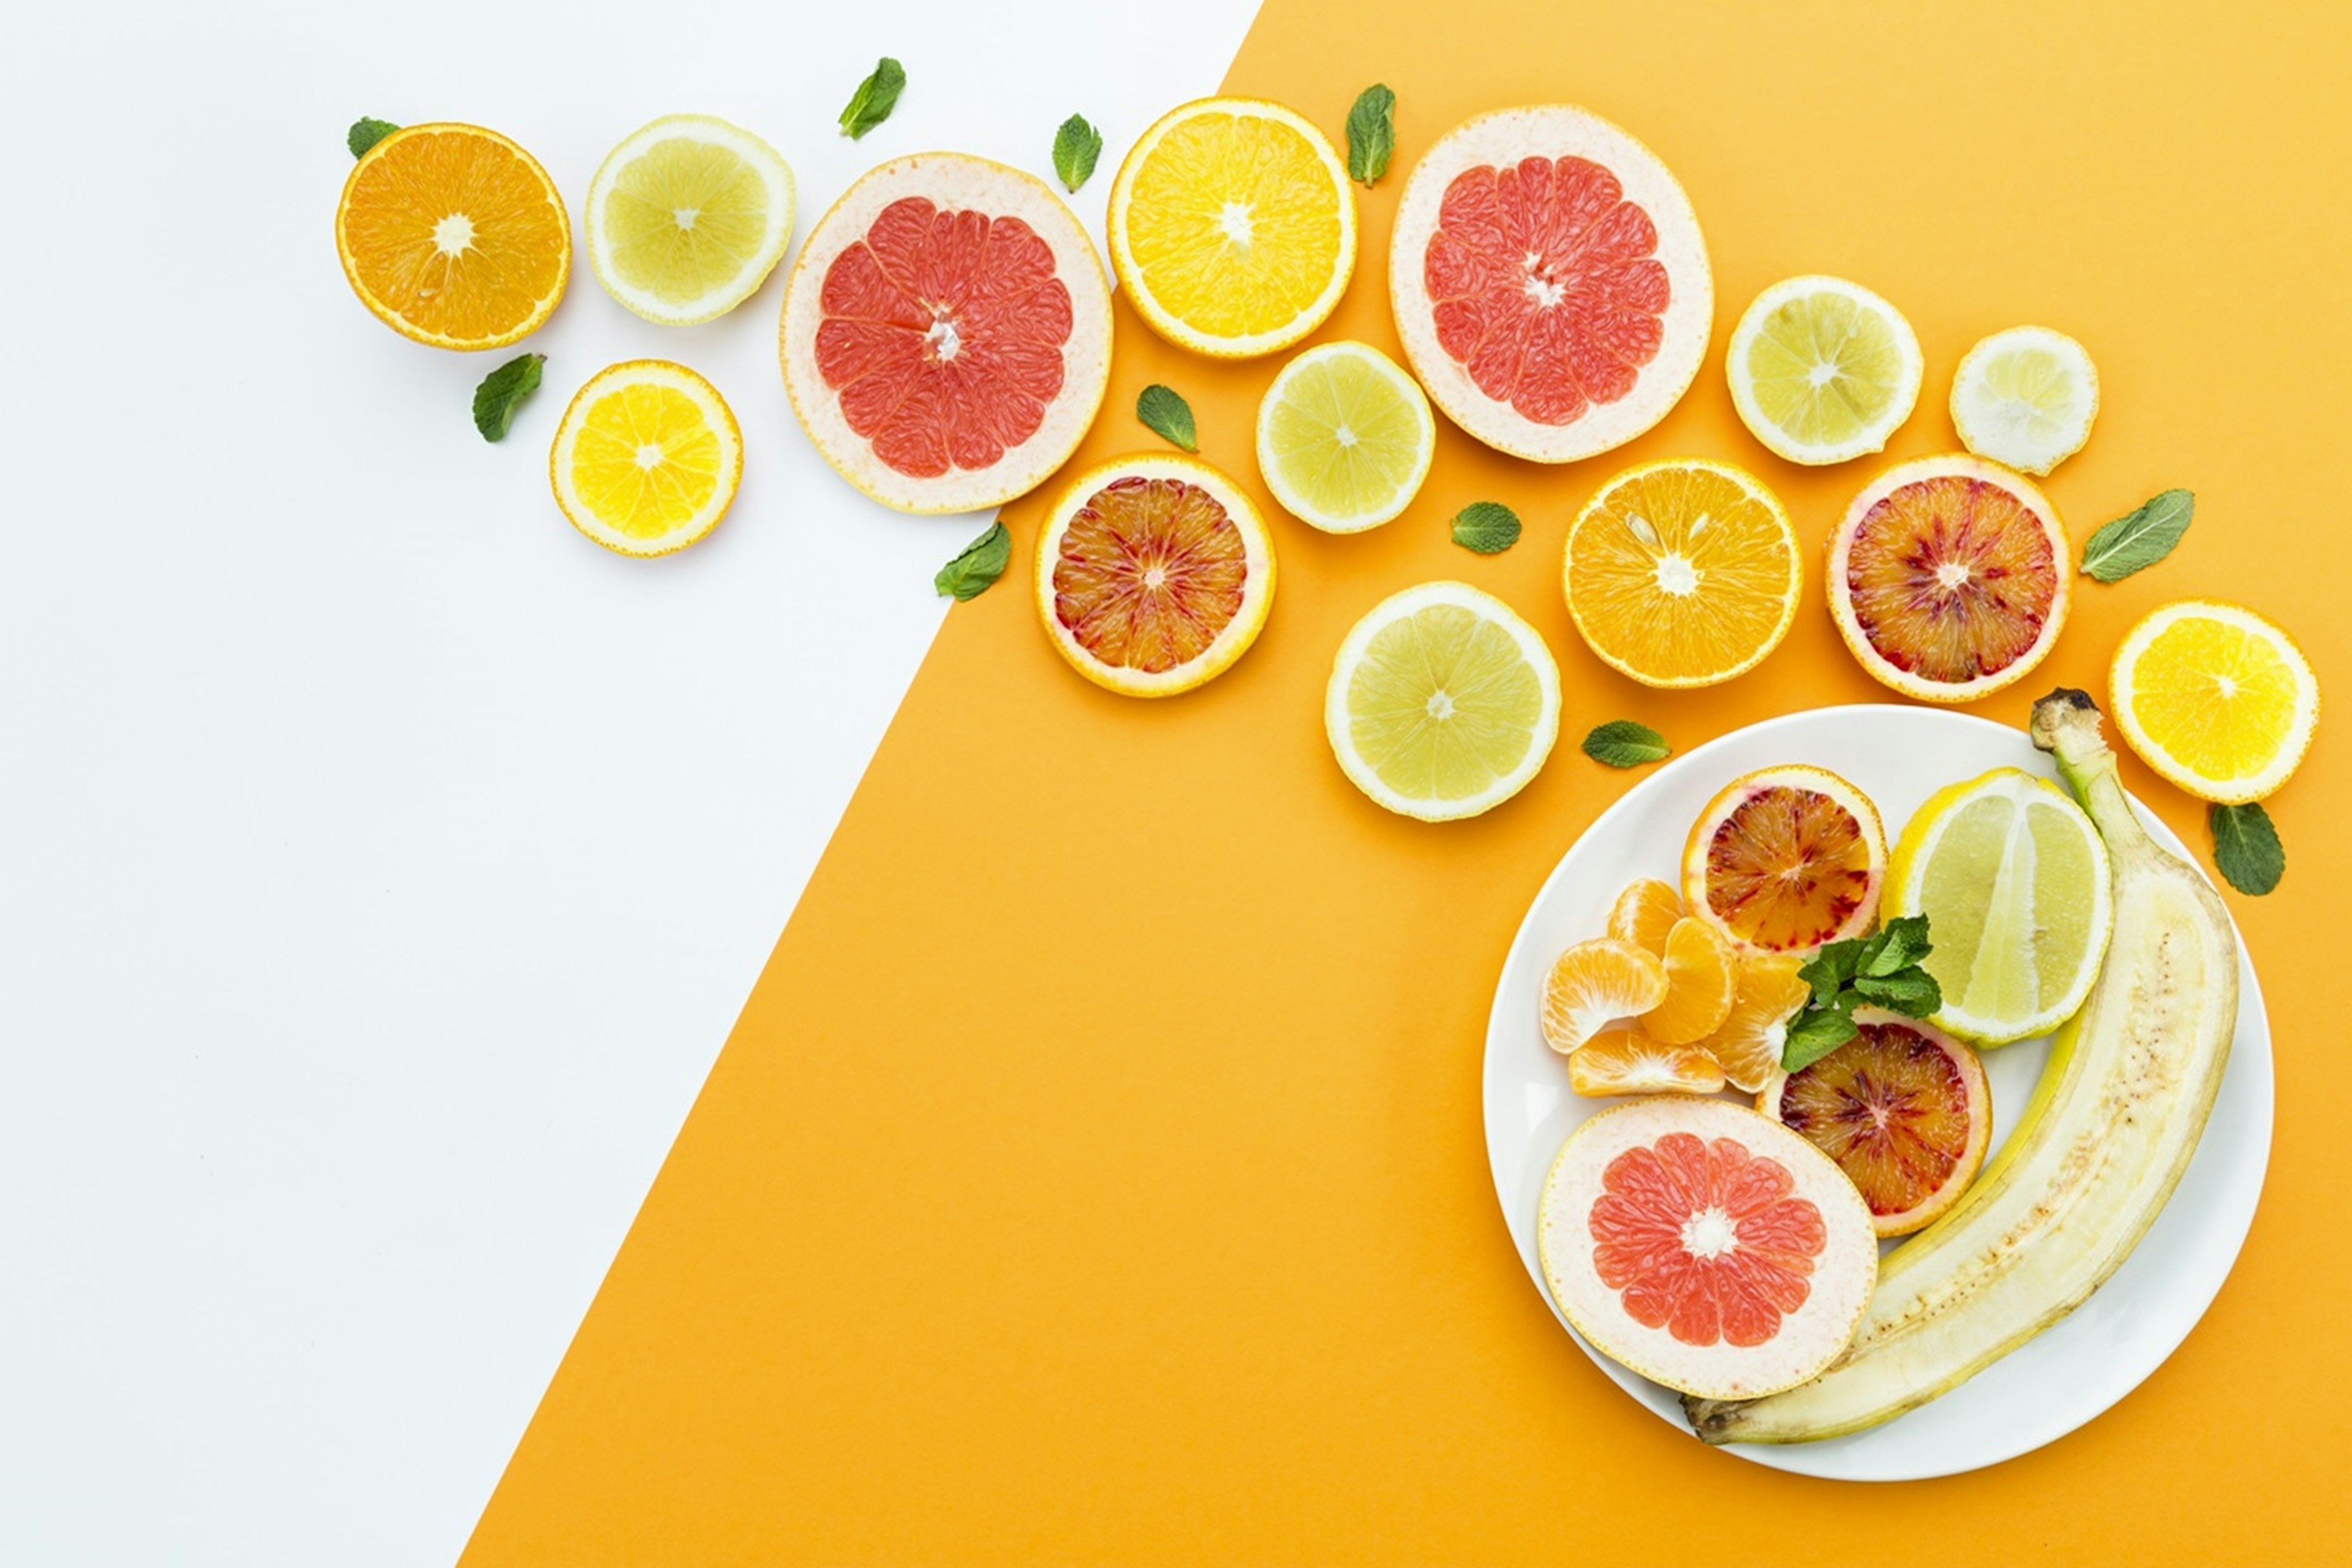 Slices of different citrus fruits